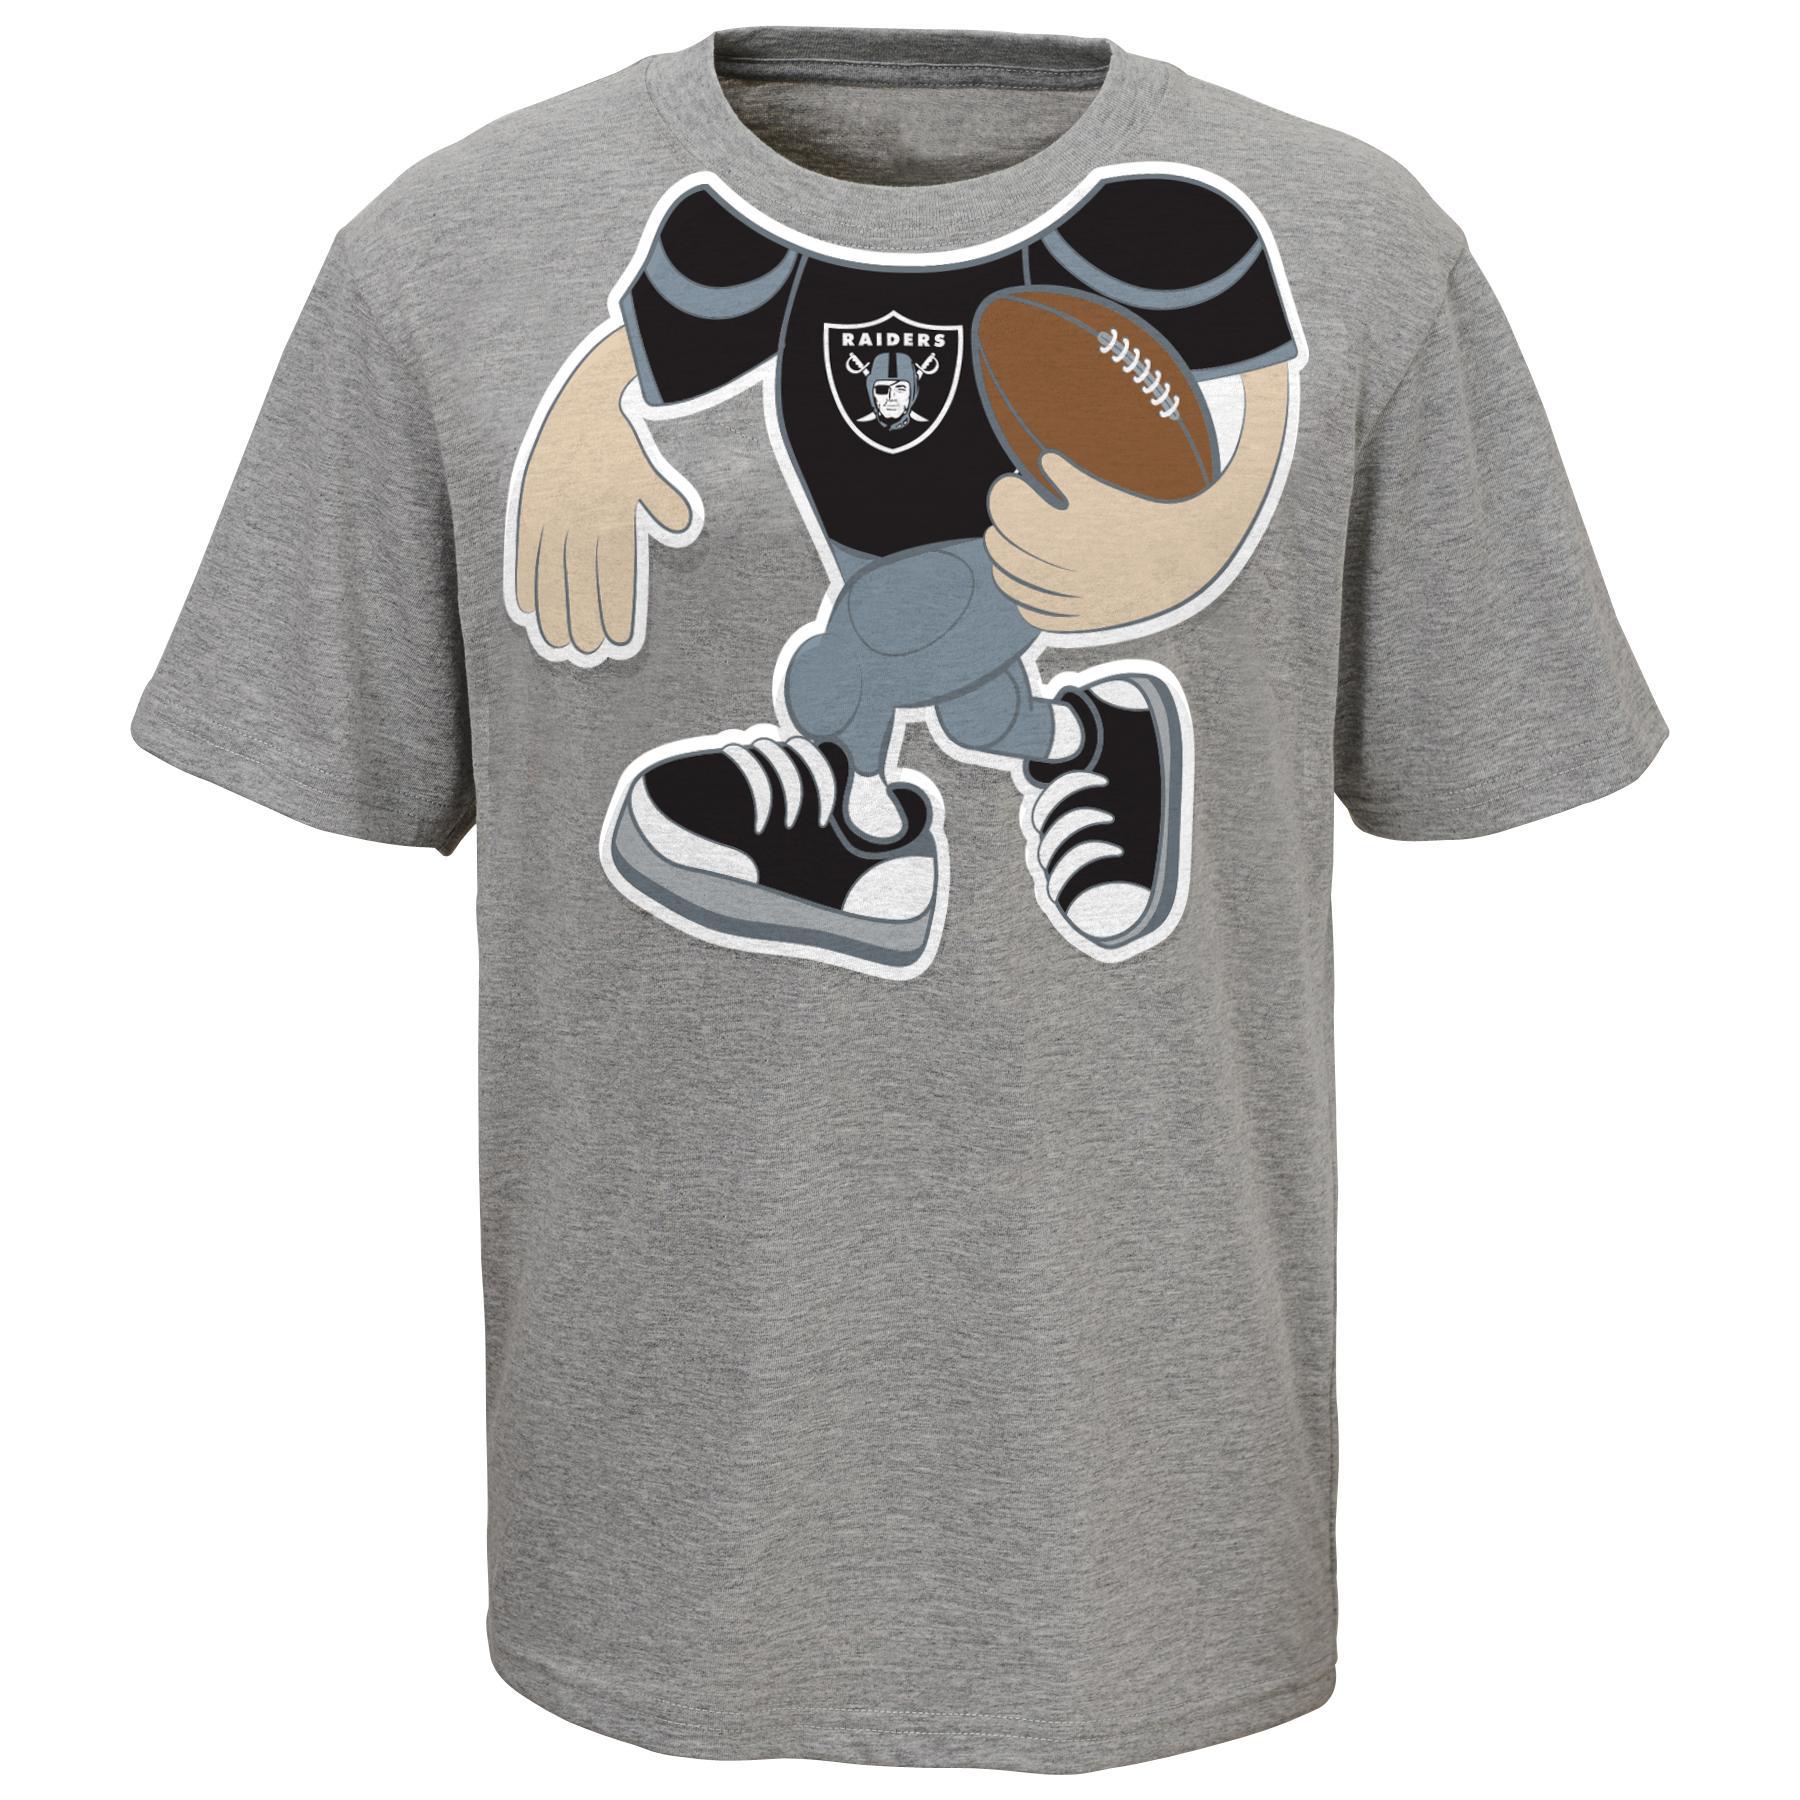 NFL Toddler Boys' Graphic T-Shirt - Oakland Raiders